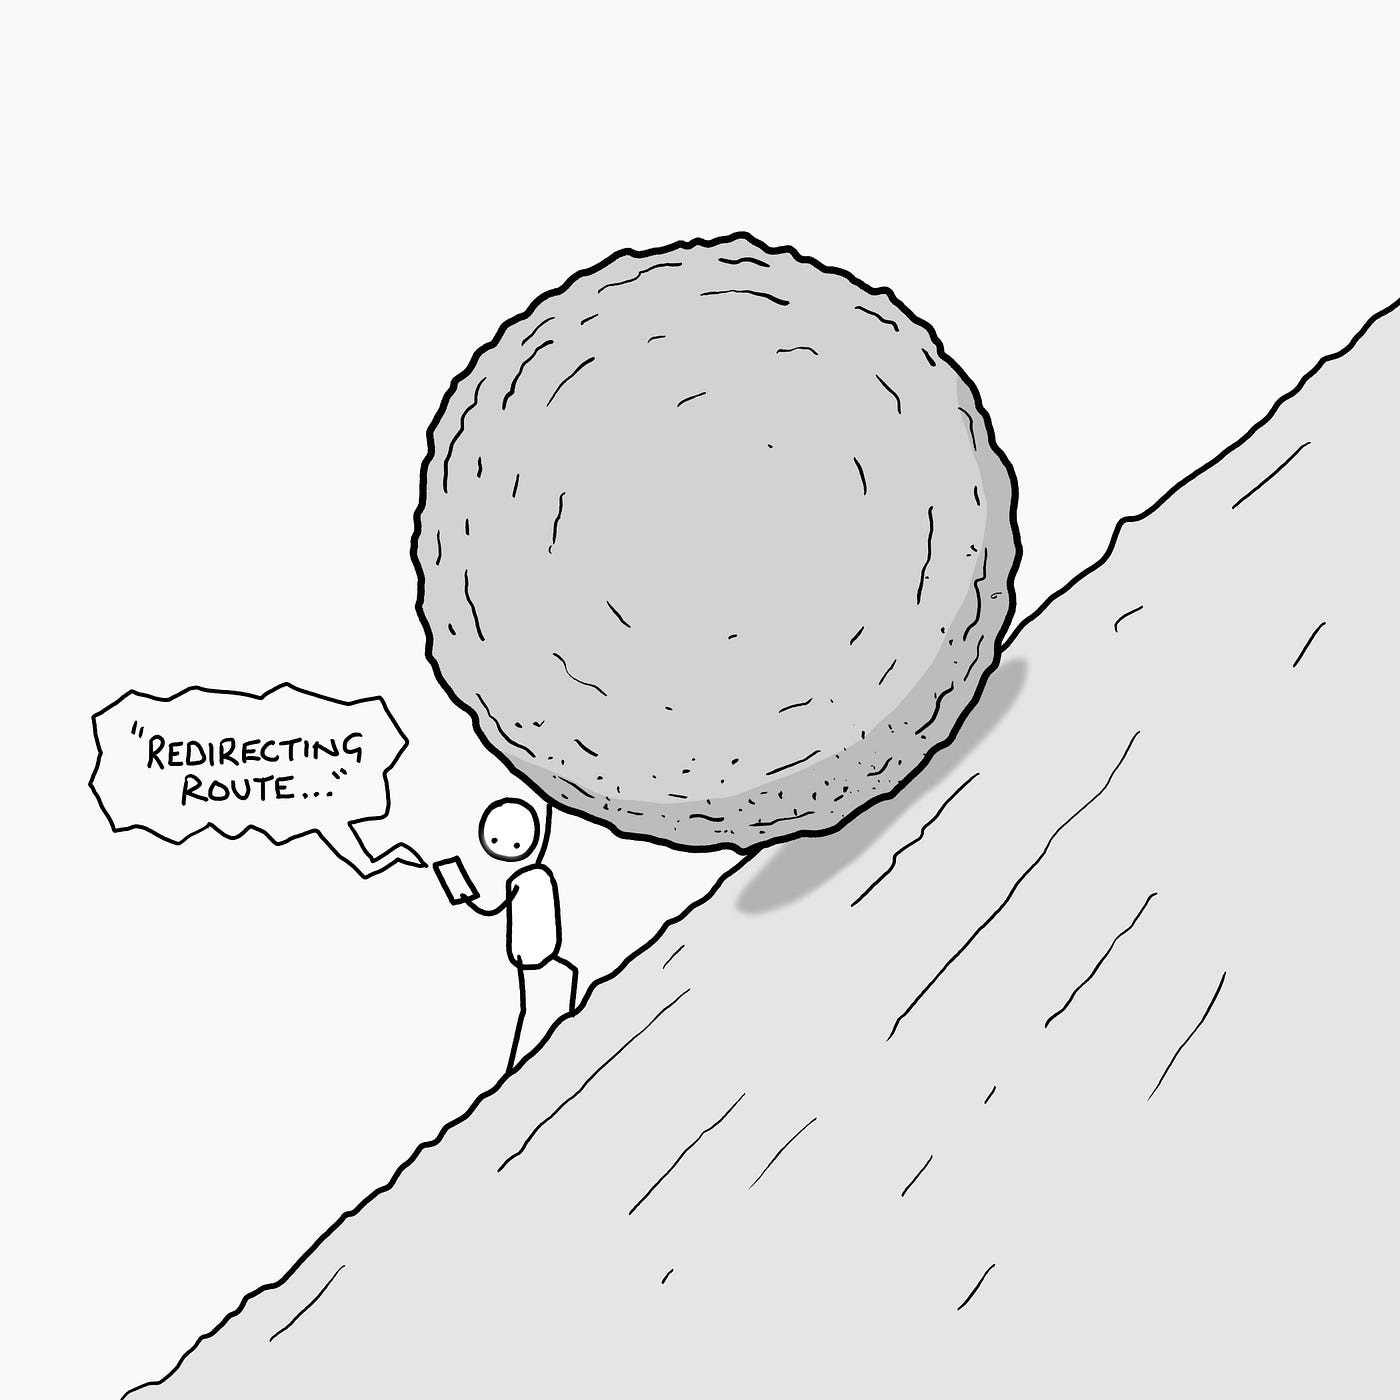 Sisyphus Pushing Boulder with GPS complications comic by Chaz Hutton